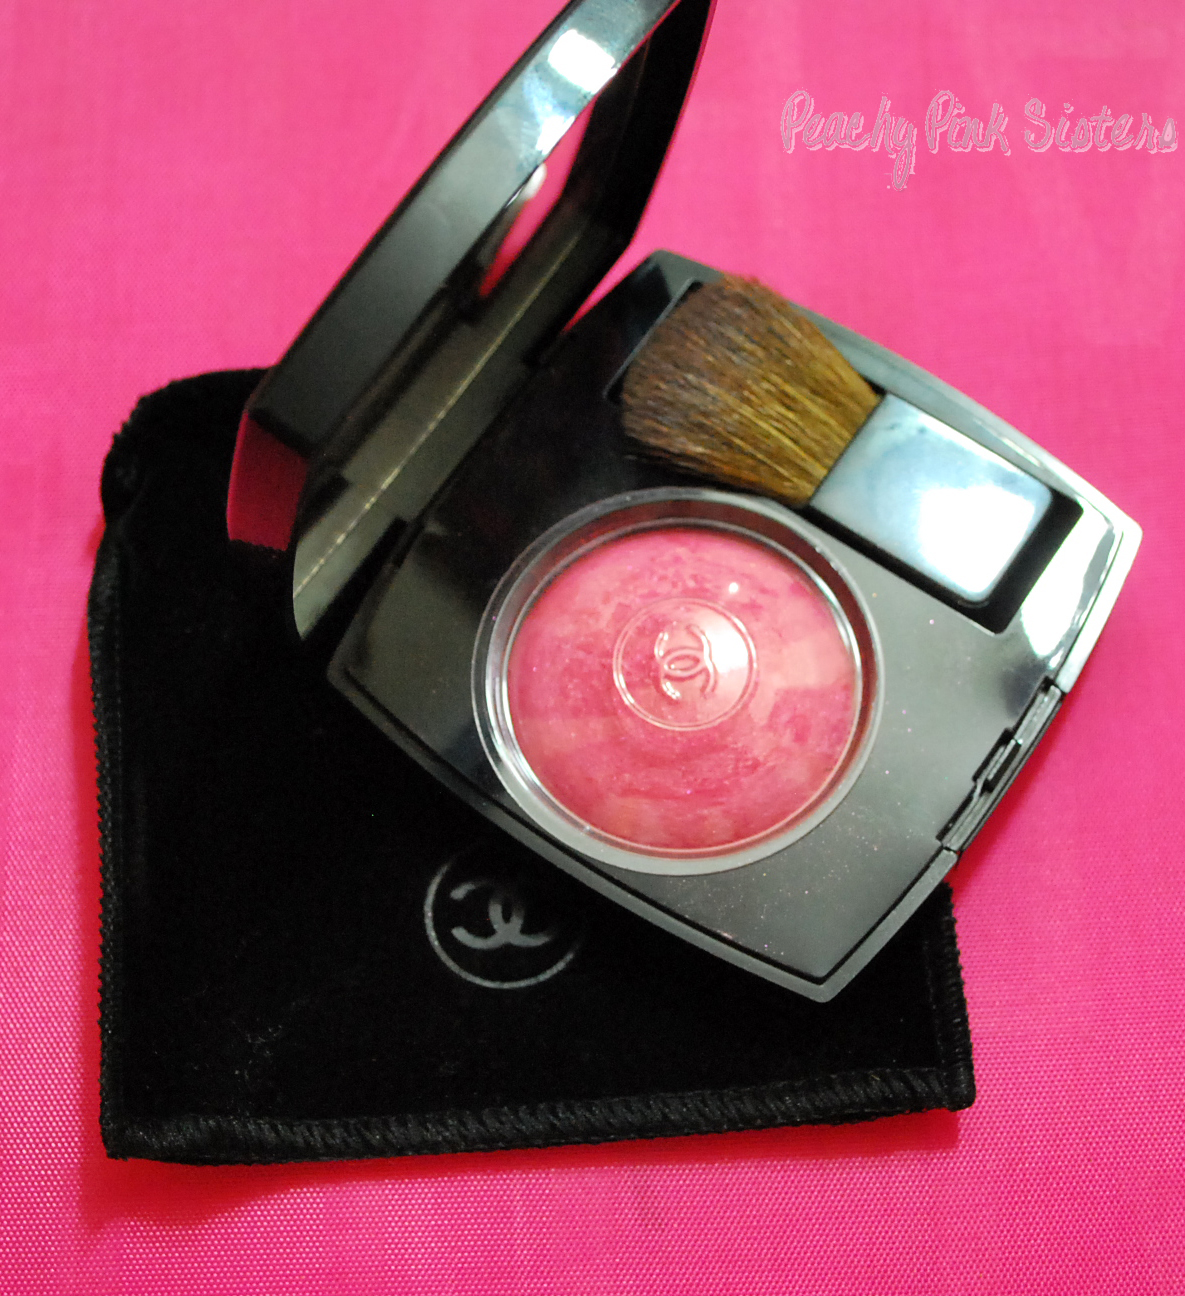 Peachy Pink Sisters: Chanel Joues Contraste Powder Blush in 67 Rose  Tourbillon